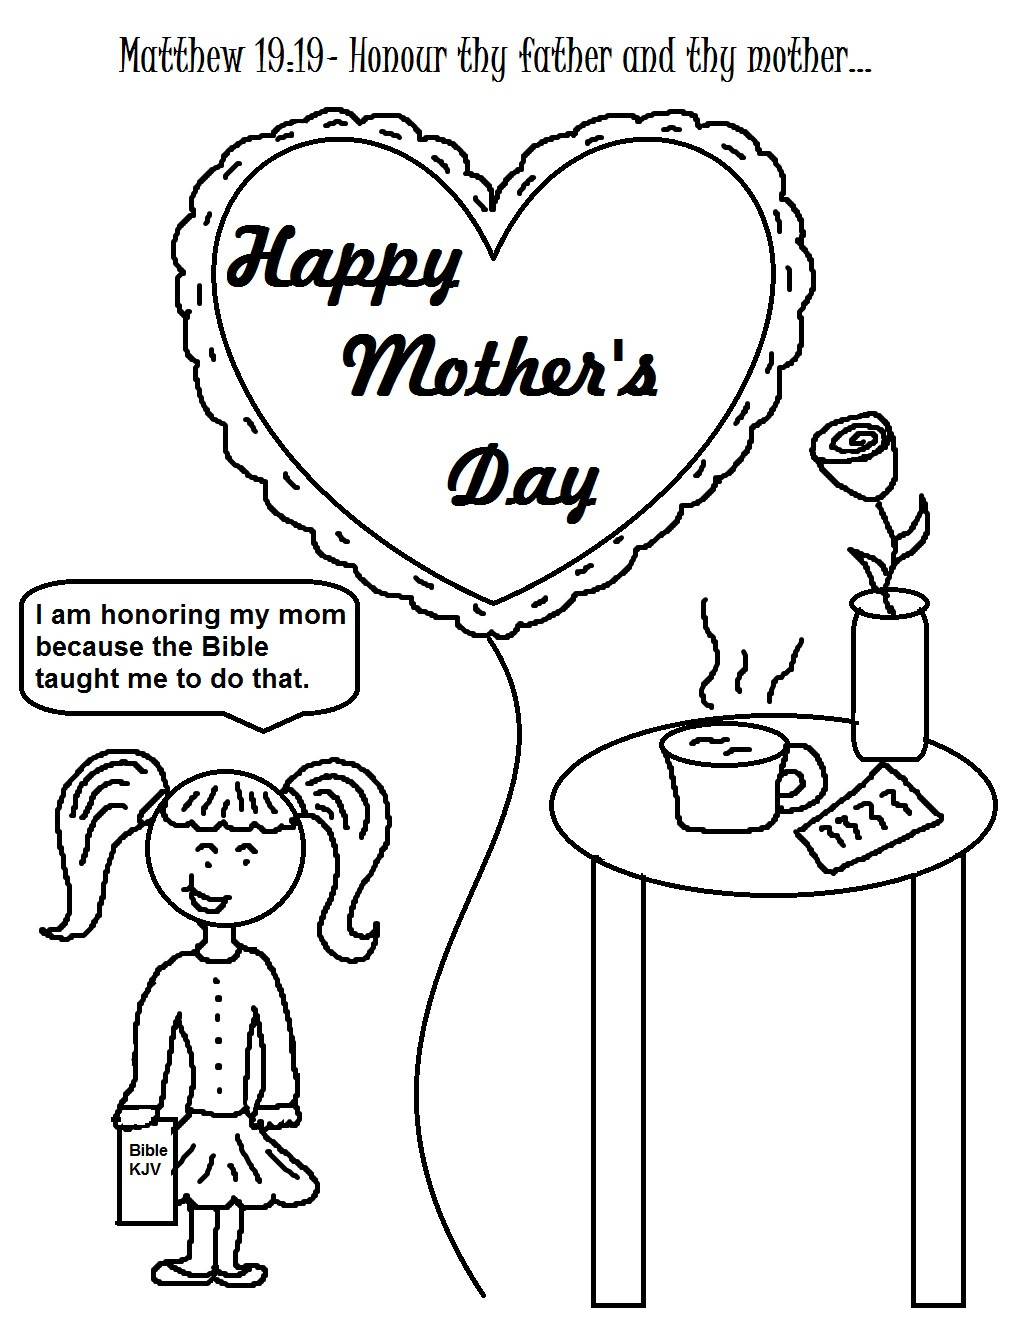 Mothers Day Coloring Pages For Kids
 Happy Mothers Day Coloring Pages